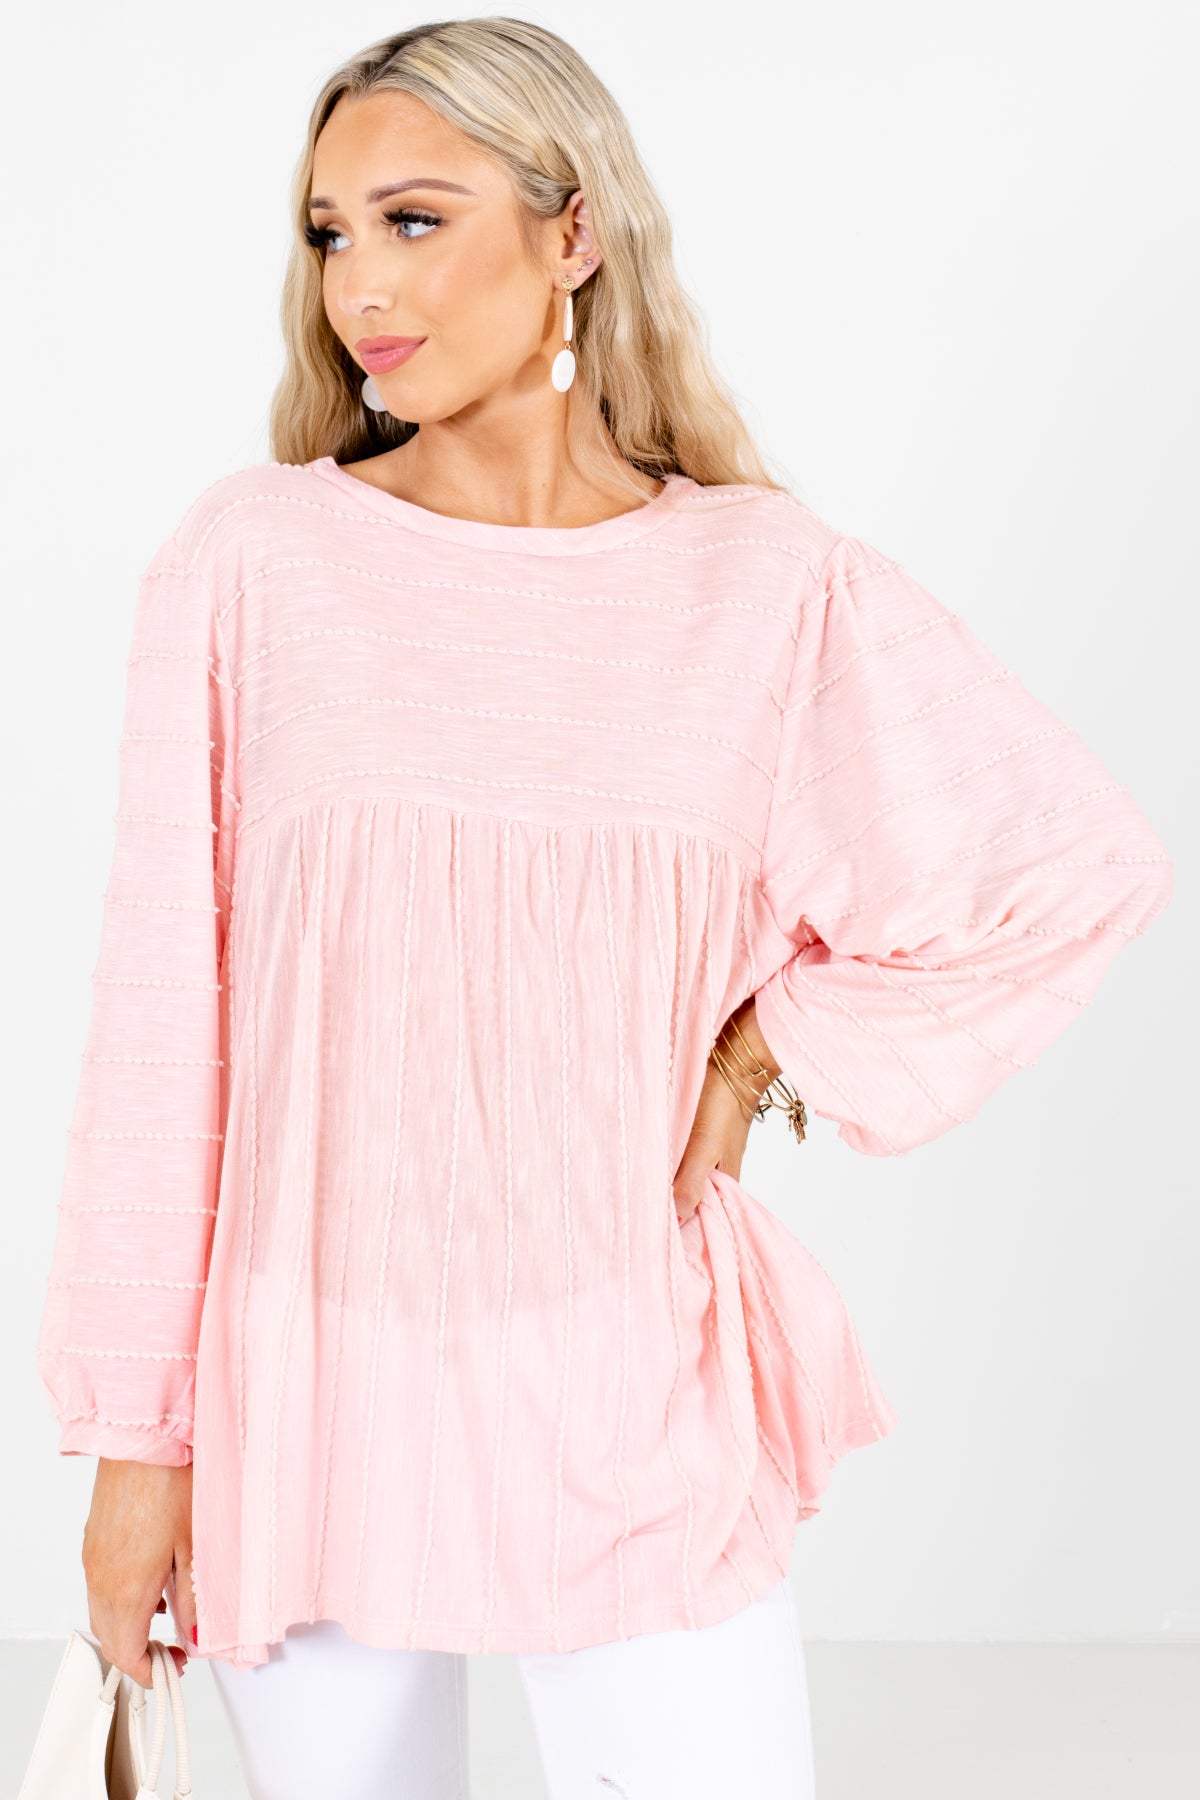 Pink and White Stitched Boutique Tops for Women